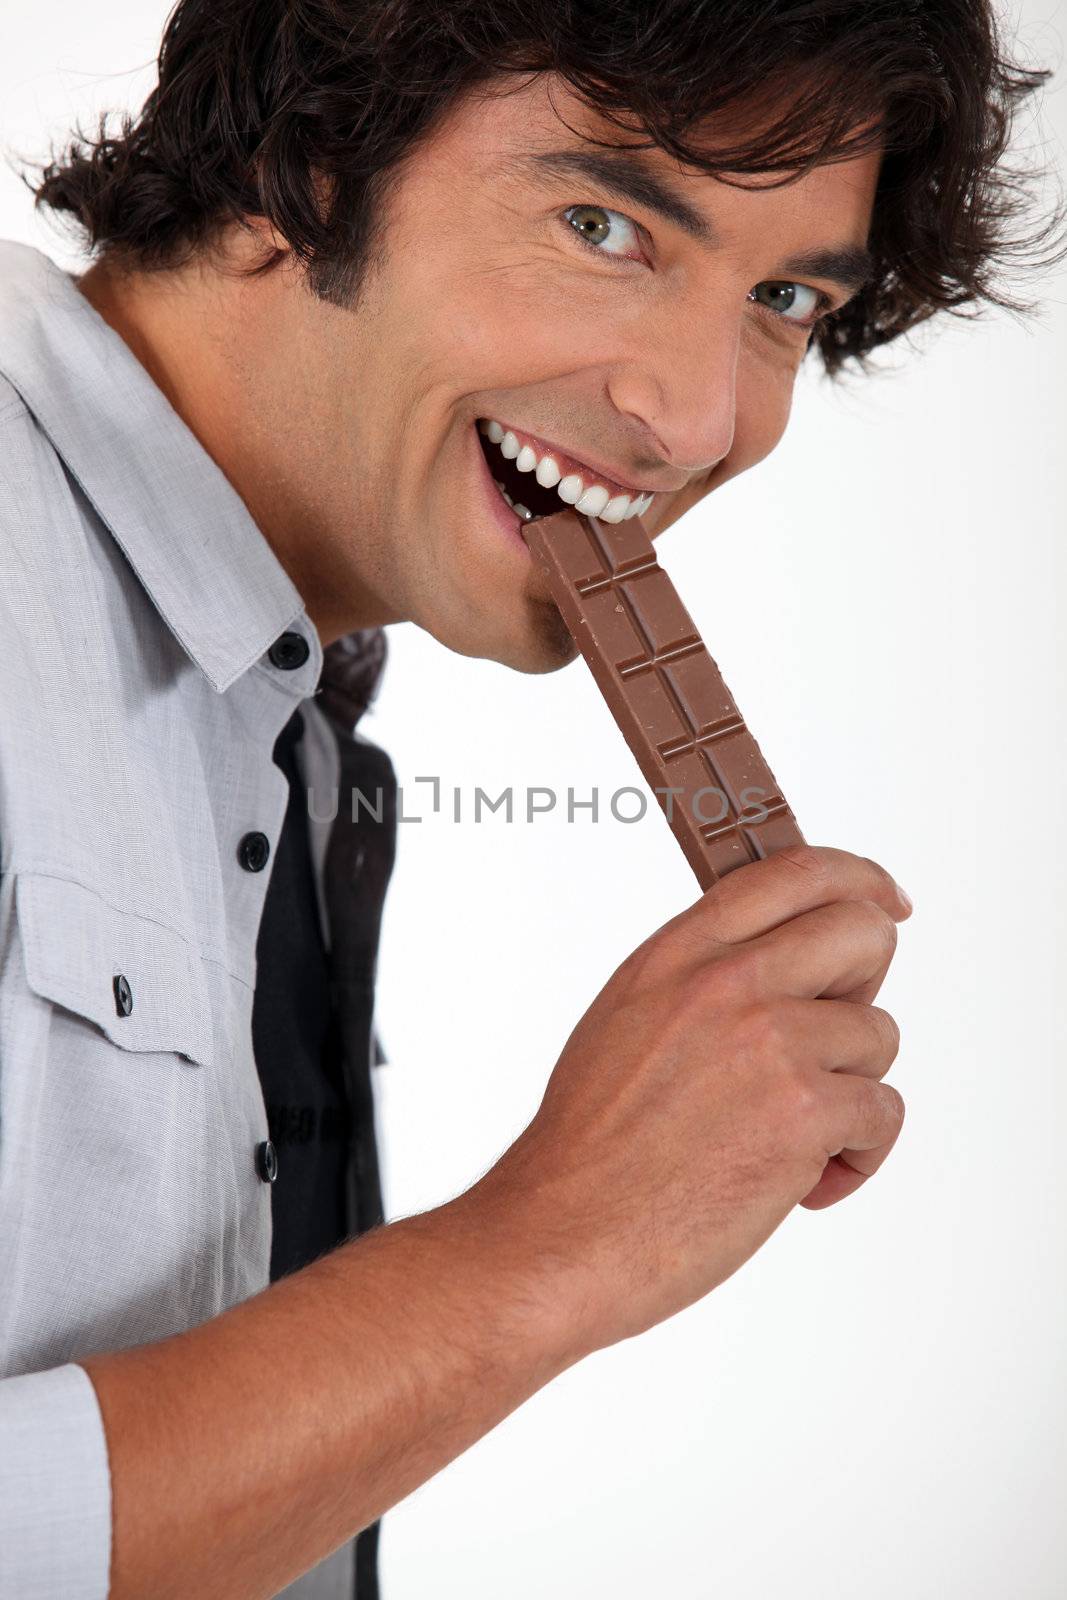 man eating chocolate by phovoir